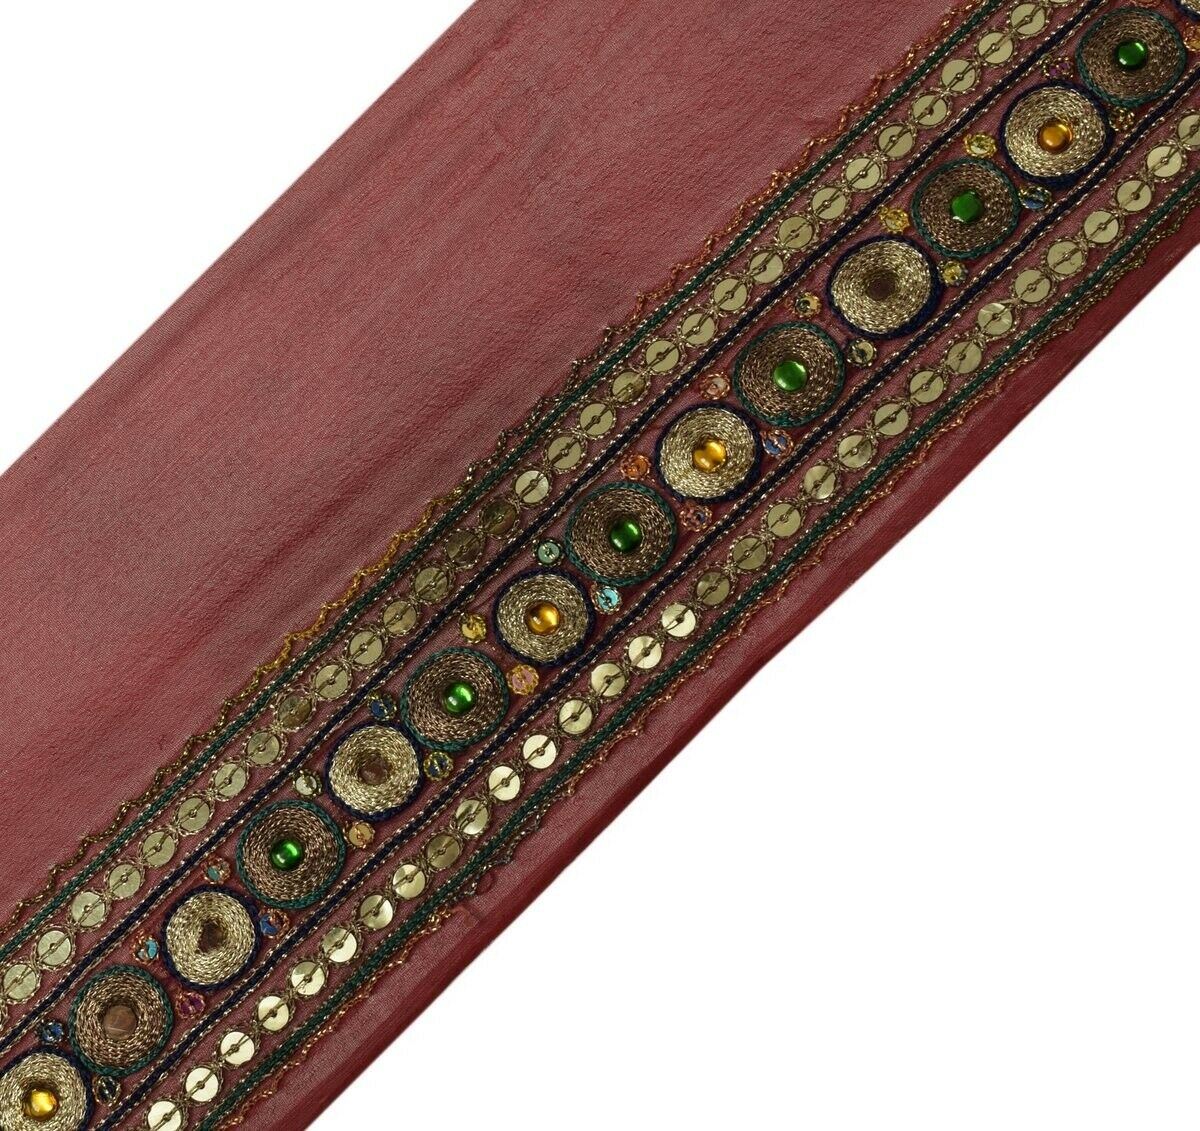 2" W Vintage Sari Border Indian Craft Trim Embroidered Maroon Sewing Ribbon Lace